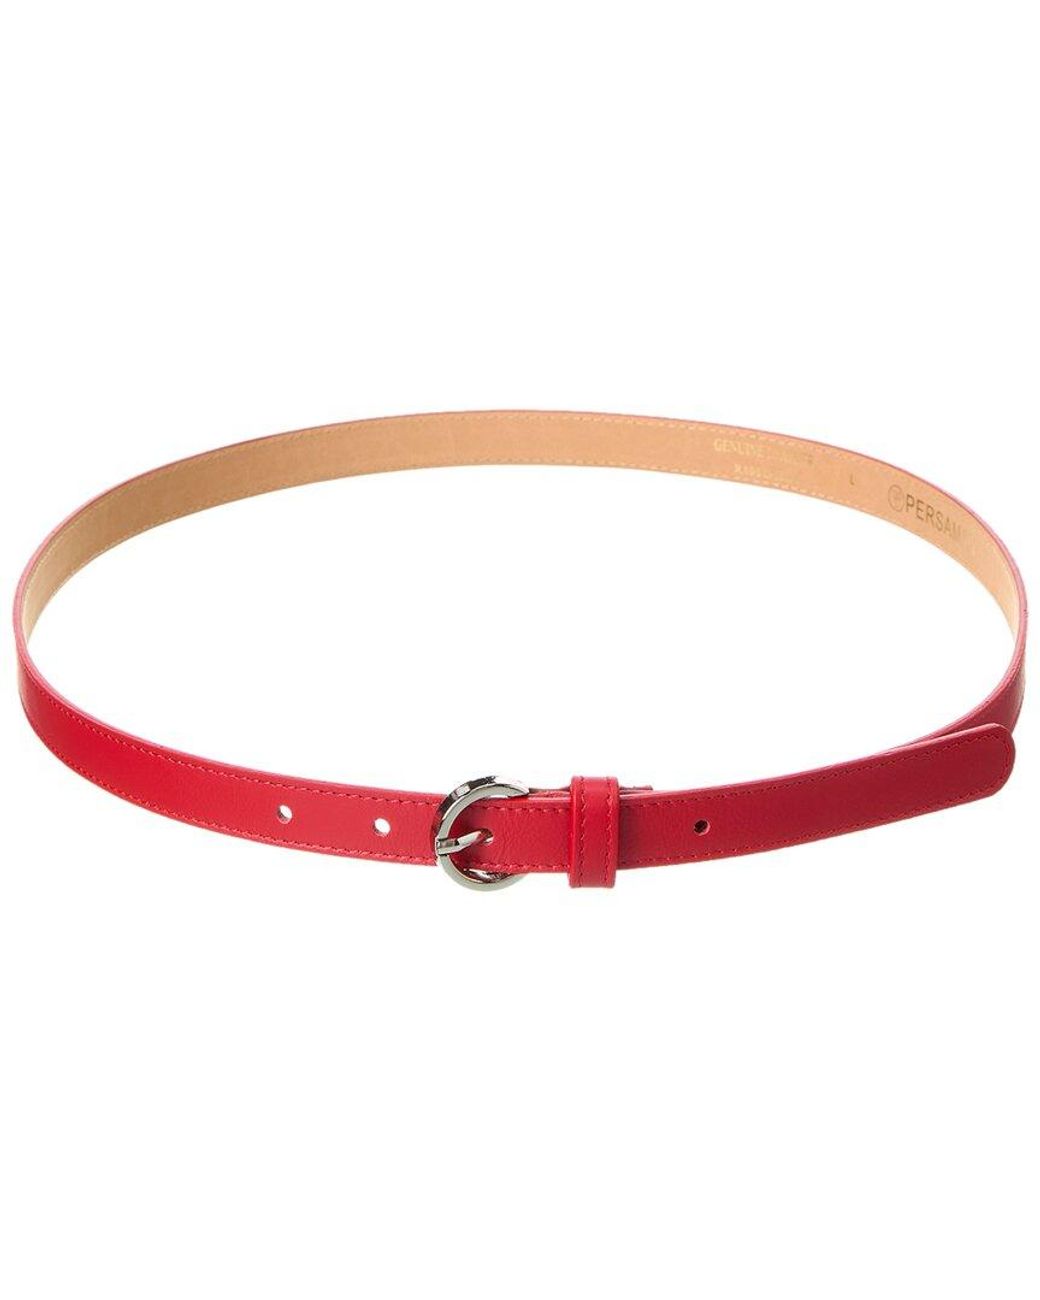 Persaman New York Anna Leather Belt in Red | Lyst